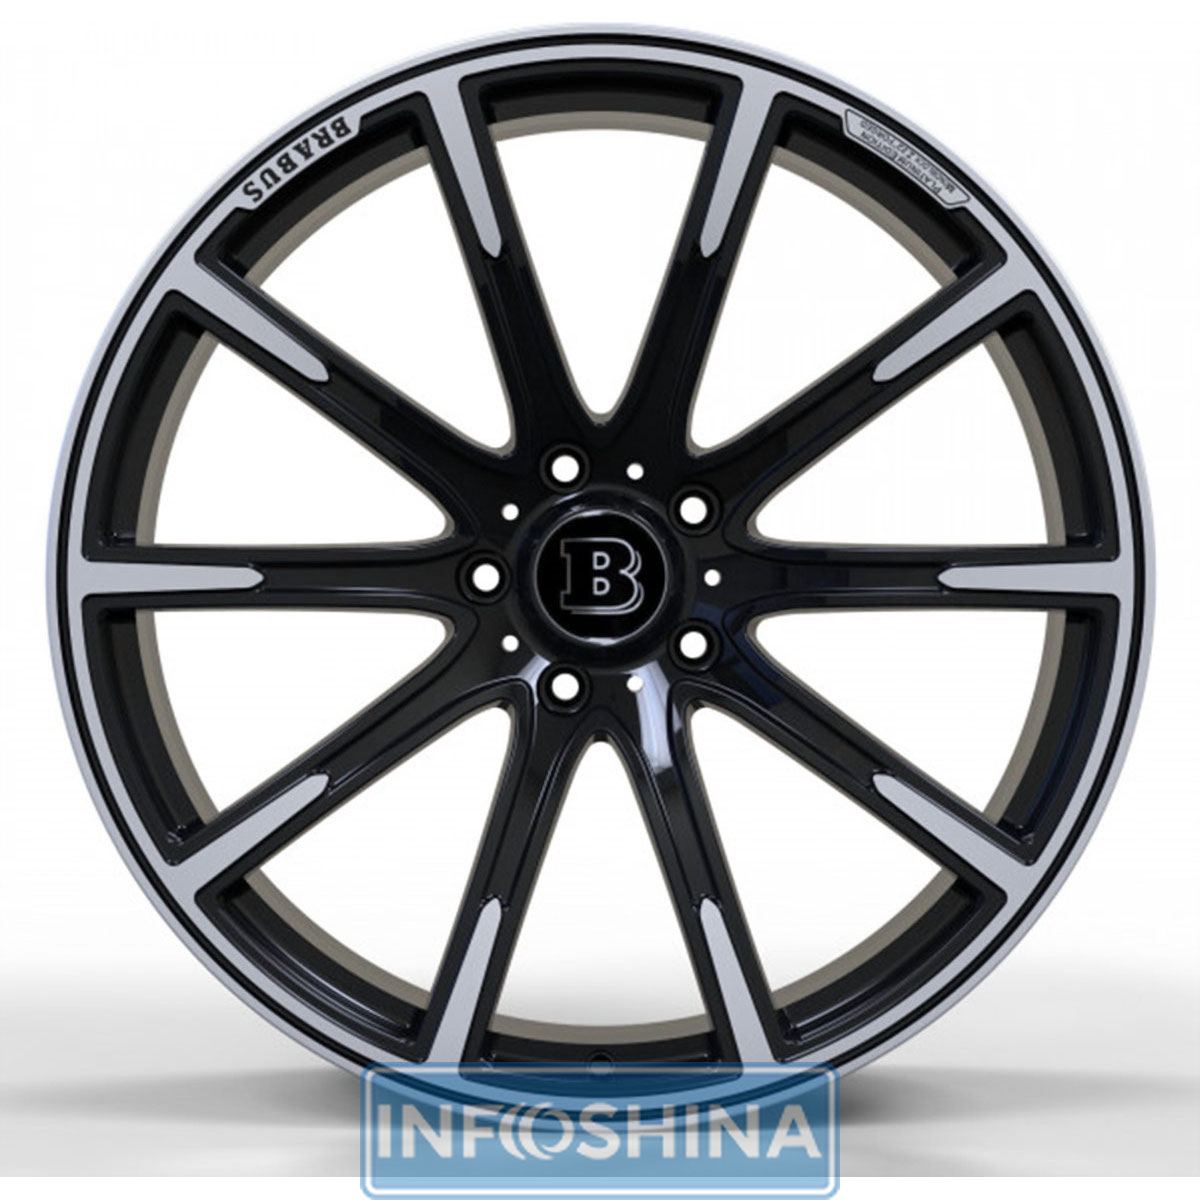 Купить диски Replica Forged MR1115 Satin Black With Machined Face R23 W11 PCD5x130 ET25 DIA84.1